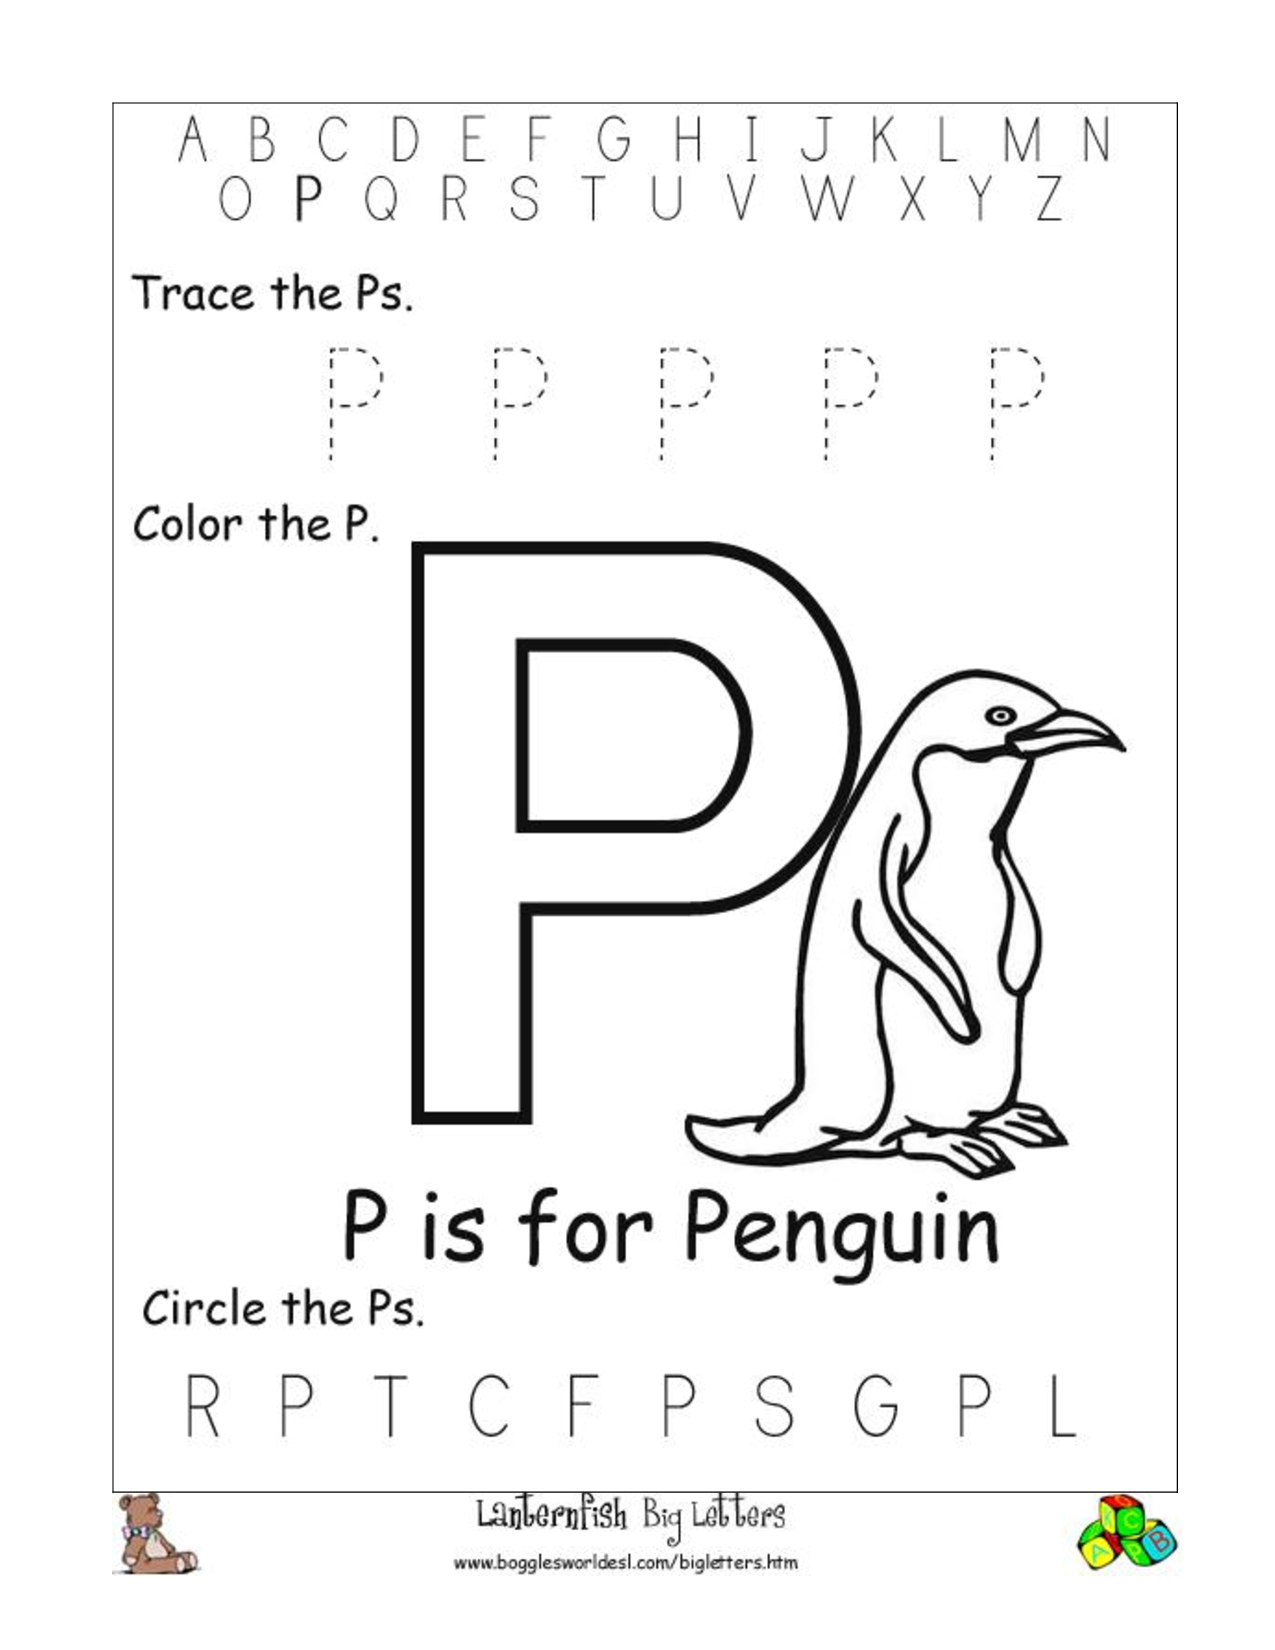 Letter Printable Images Gallery Category Page 7 - printablee.com